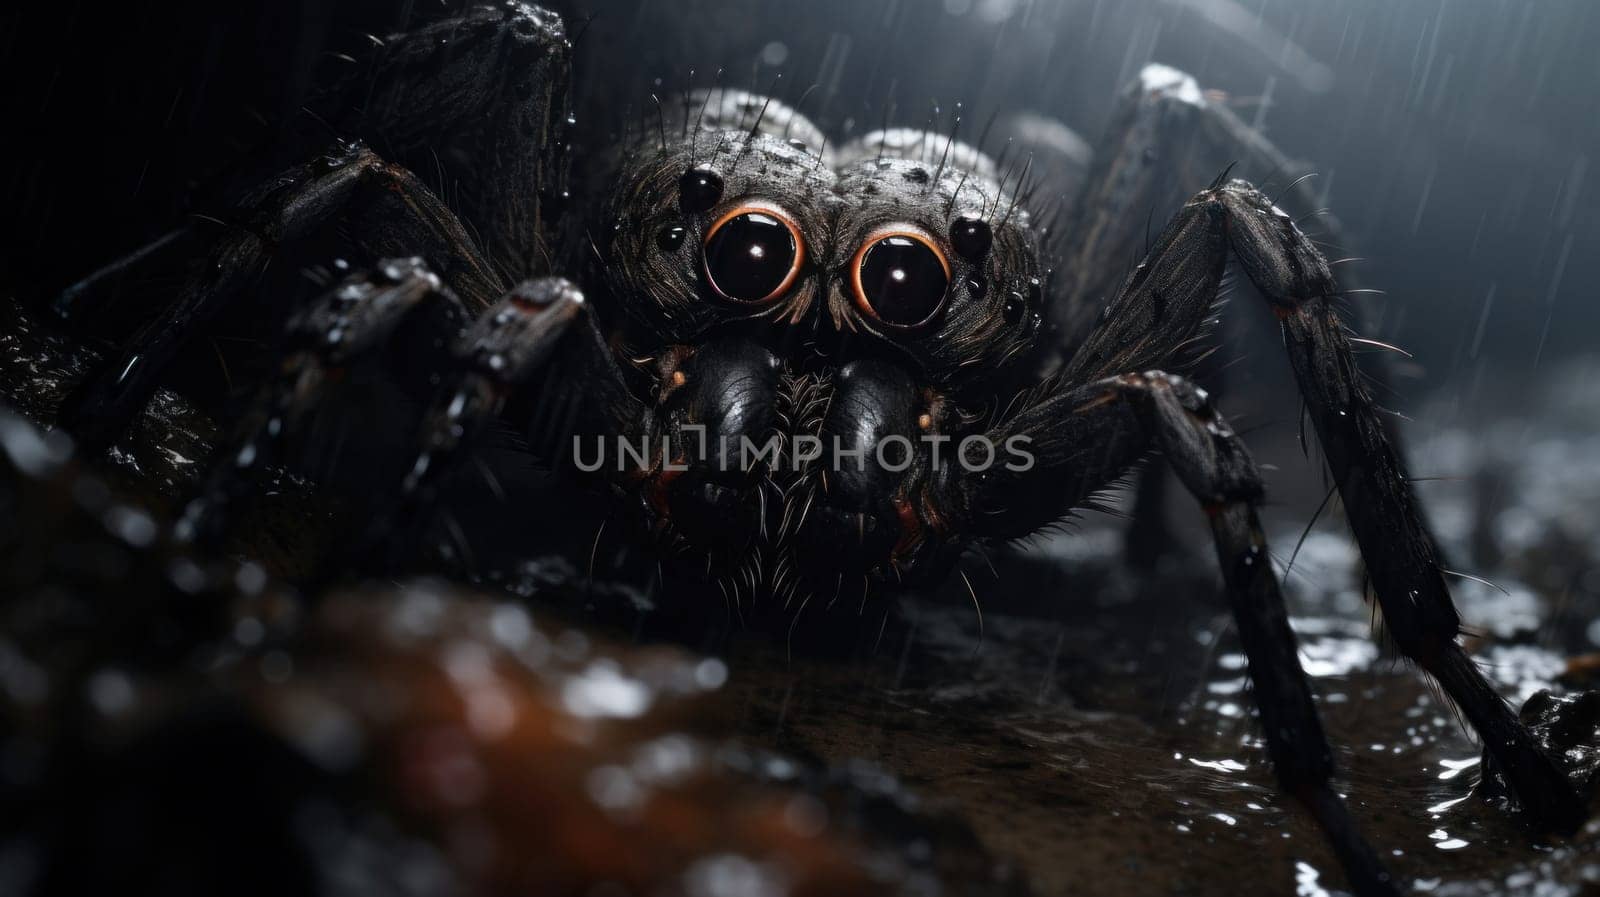 A close up of a spider with big eyes in the rain